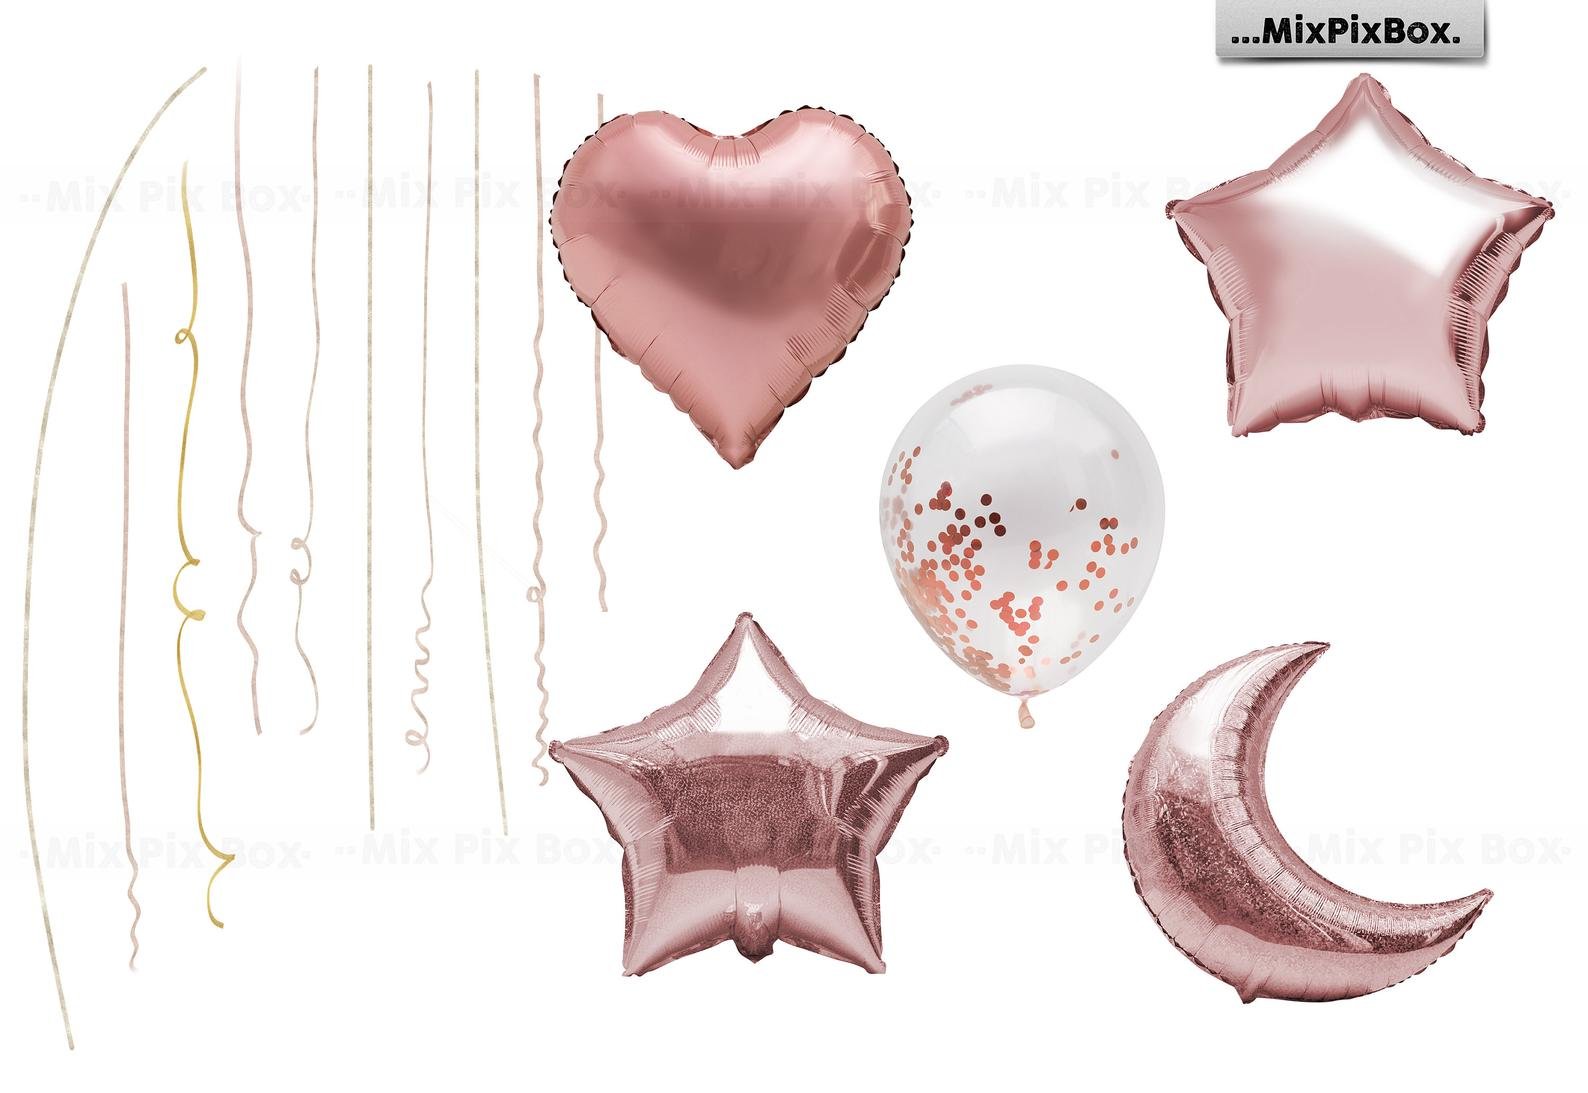 Rose Gold Foil Balloons Overlays